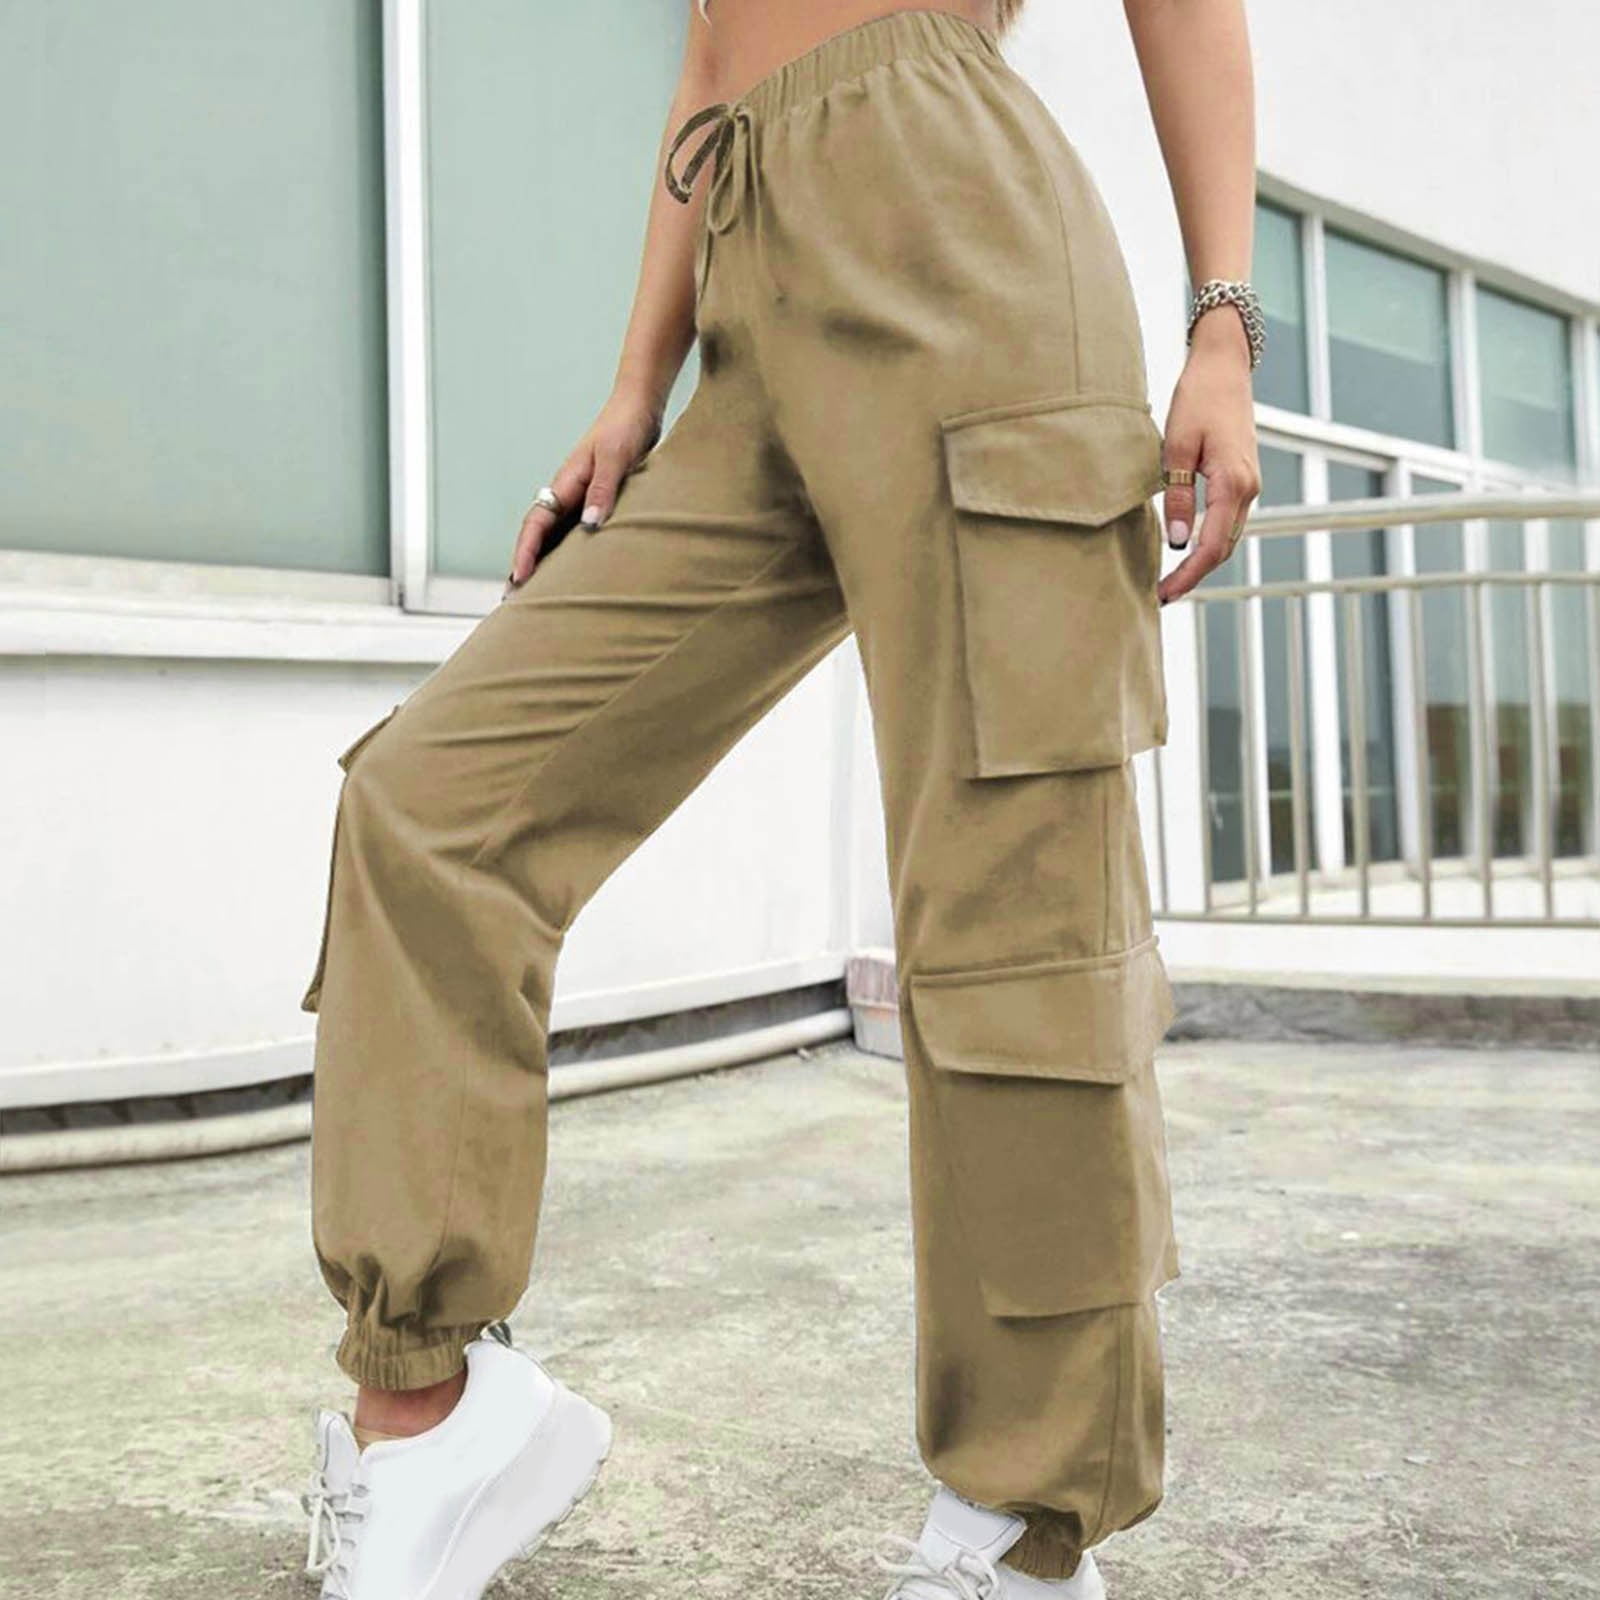 Clacive Elegant Loose Gray Office Women Pants Fashion High Waist Straight  Trousers Casual Chic Spliced Full Length Female Pants